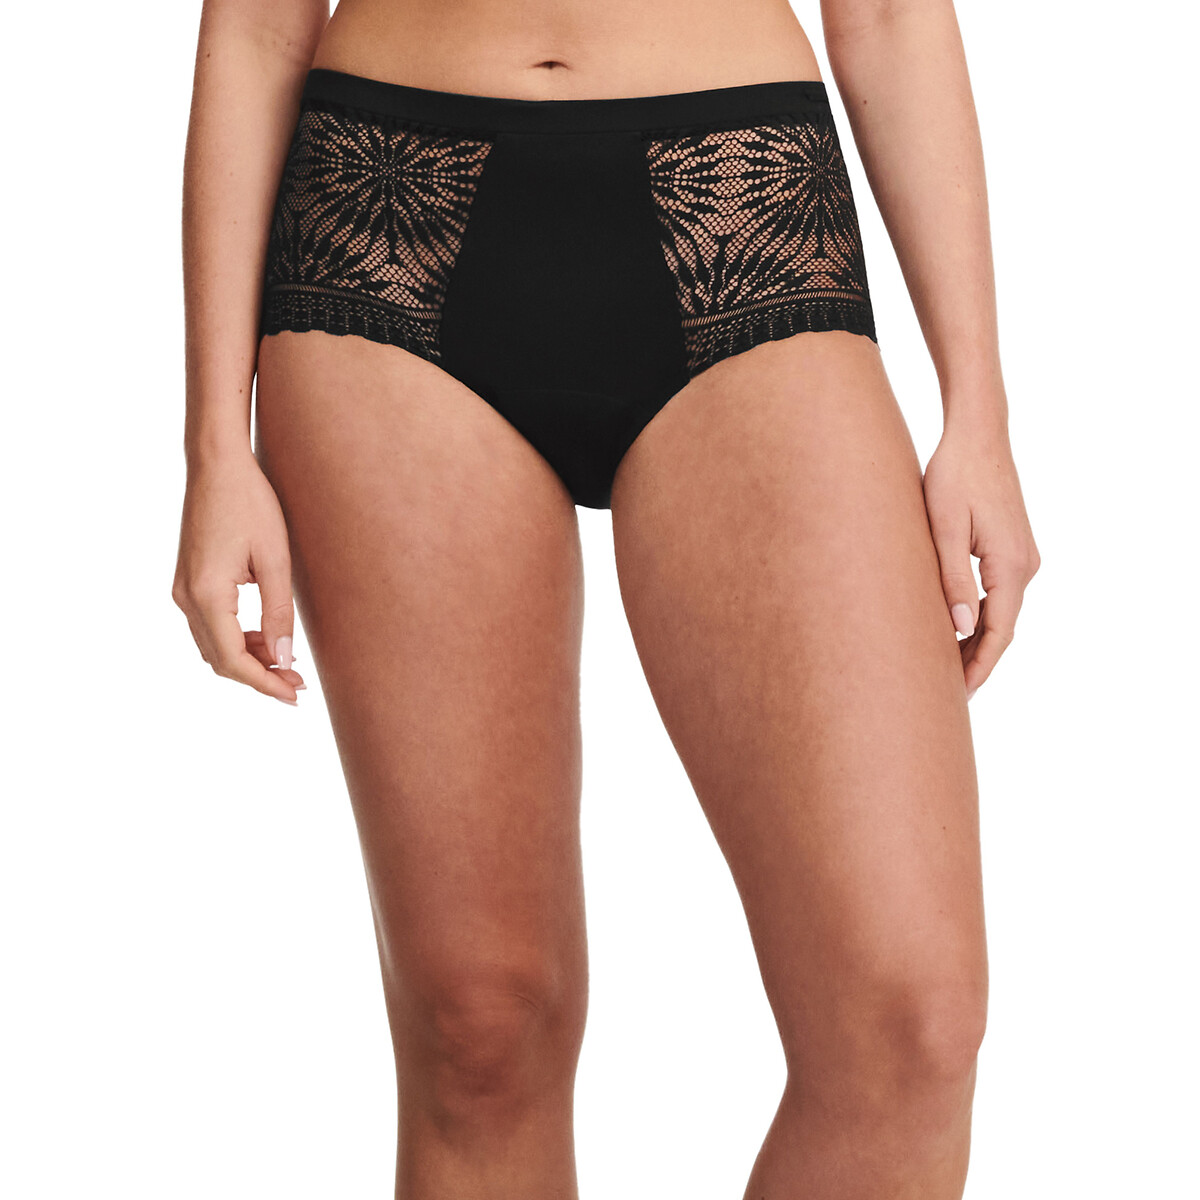 Extra Lace Period Shorts, Heavy Flow